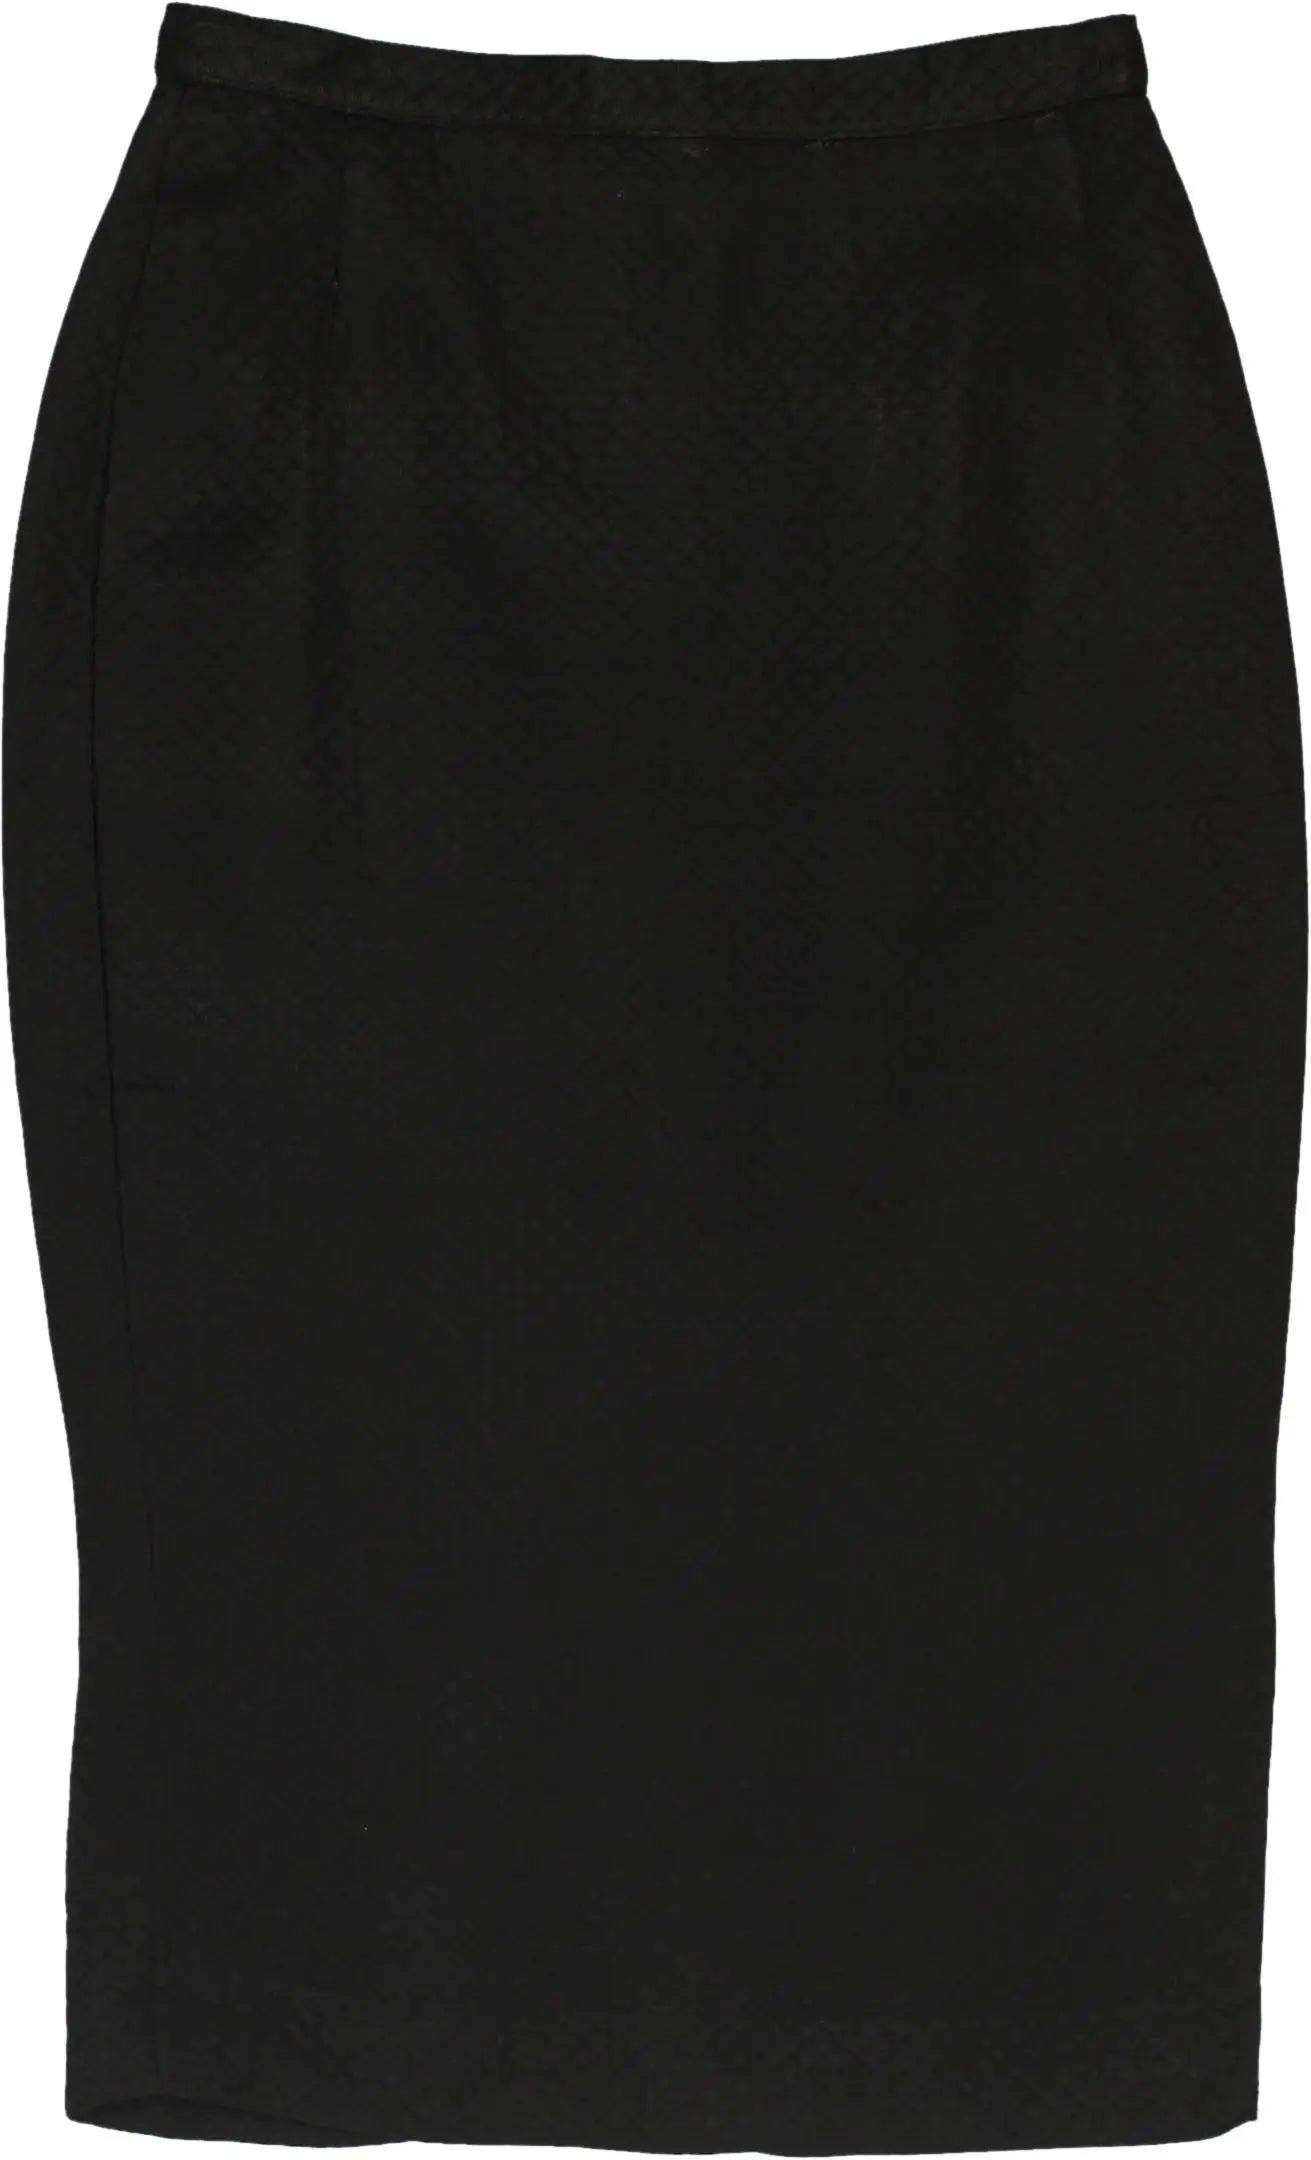 Unknown - Black pencil skirt- ThriftTale.com - Vintage and second handclothing